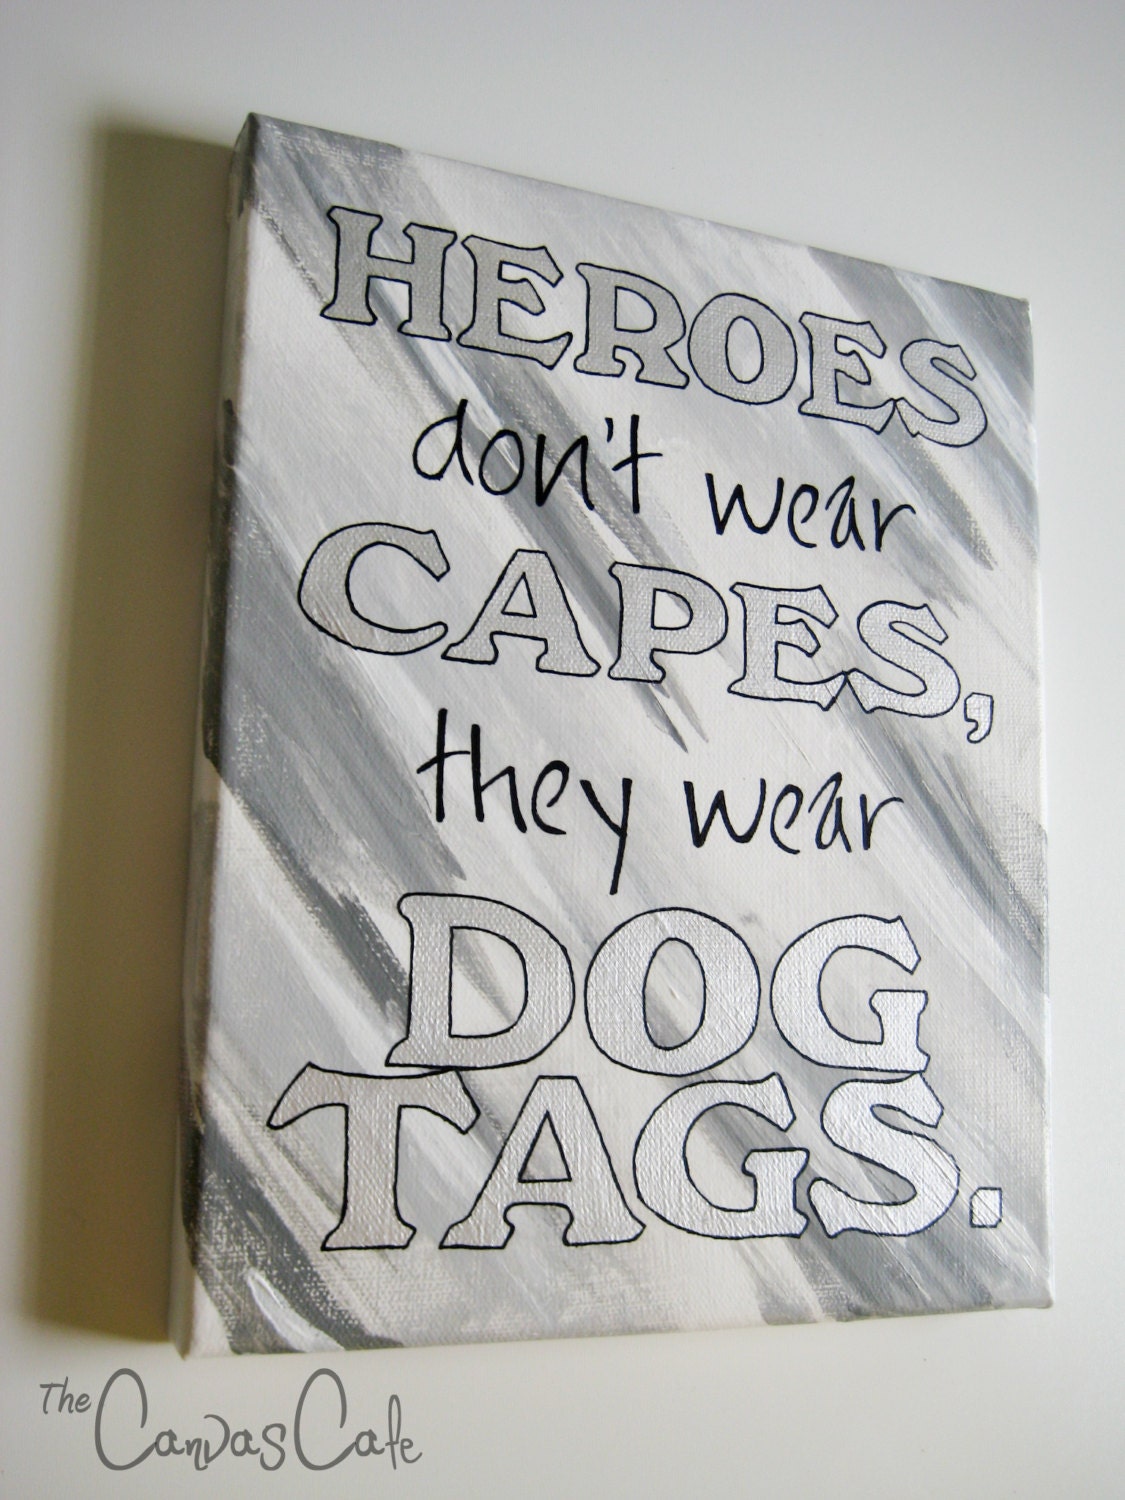 Items similar to Heroes don't wear Capes, they wear Dog Tags * Military